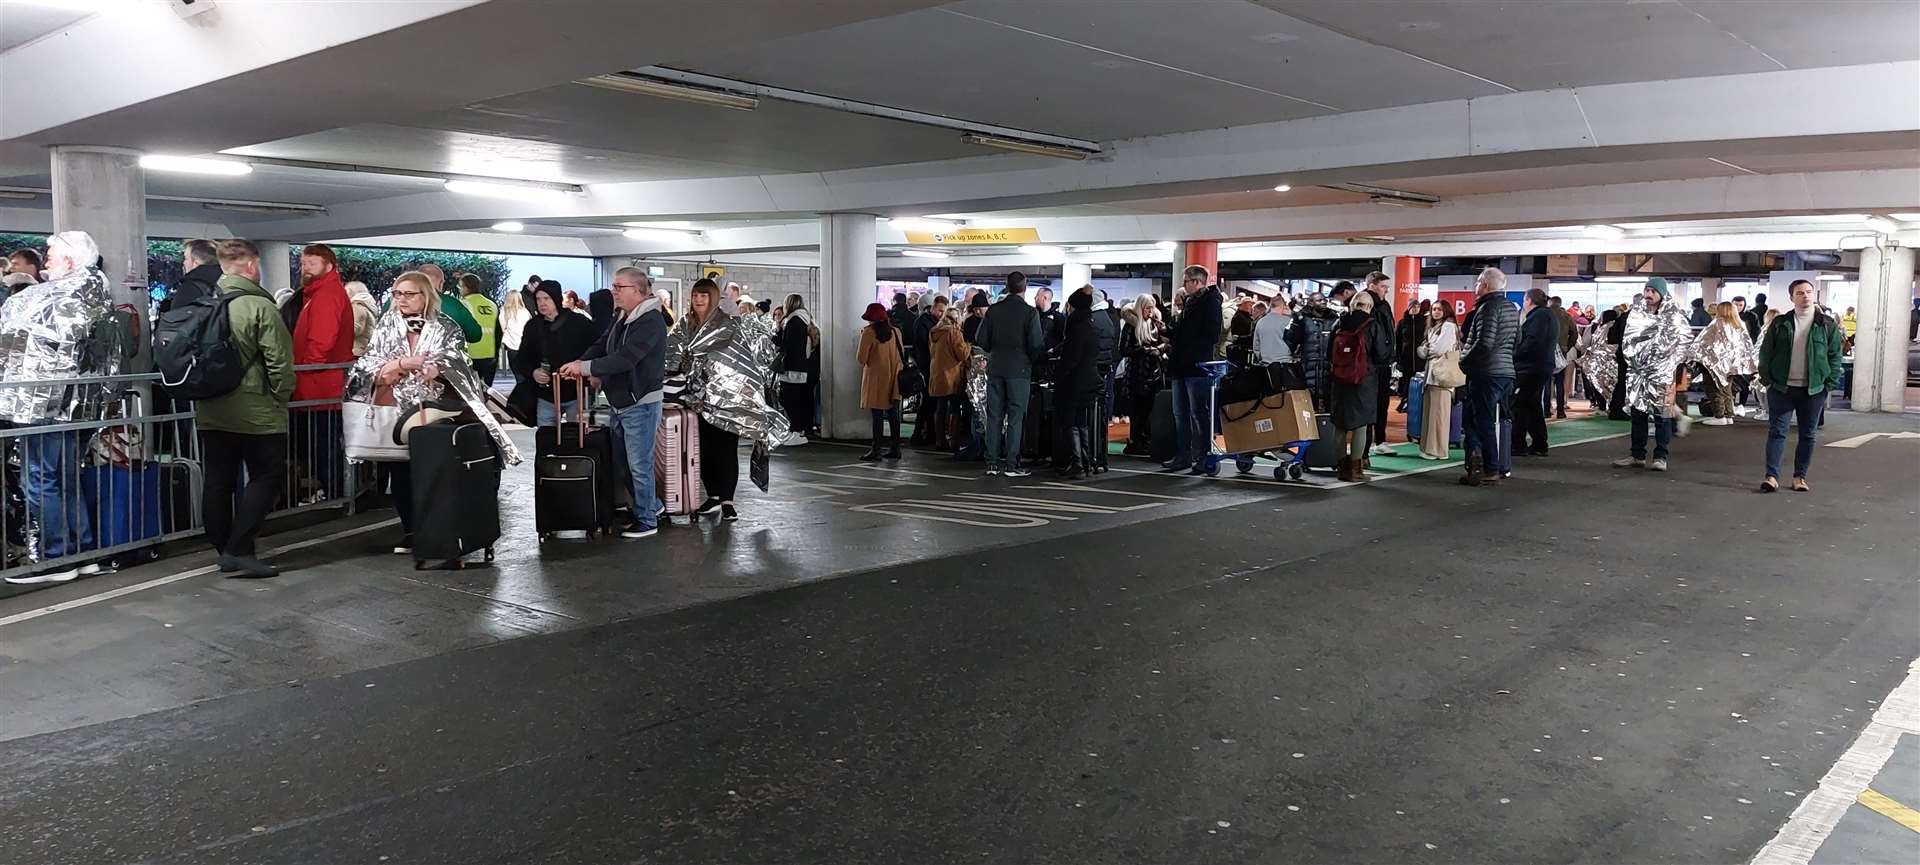 The scene at Glasgow Airport this morning.